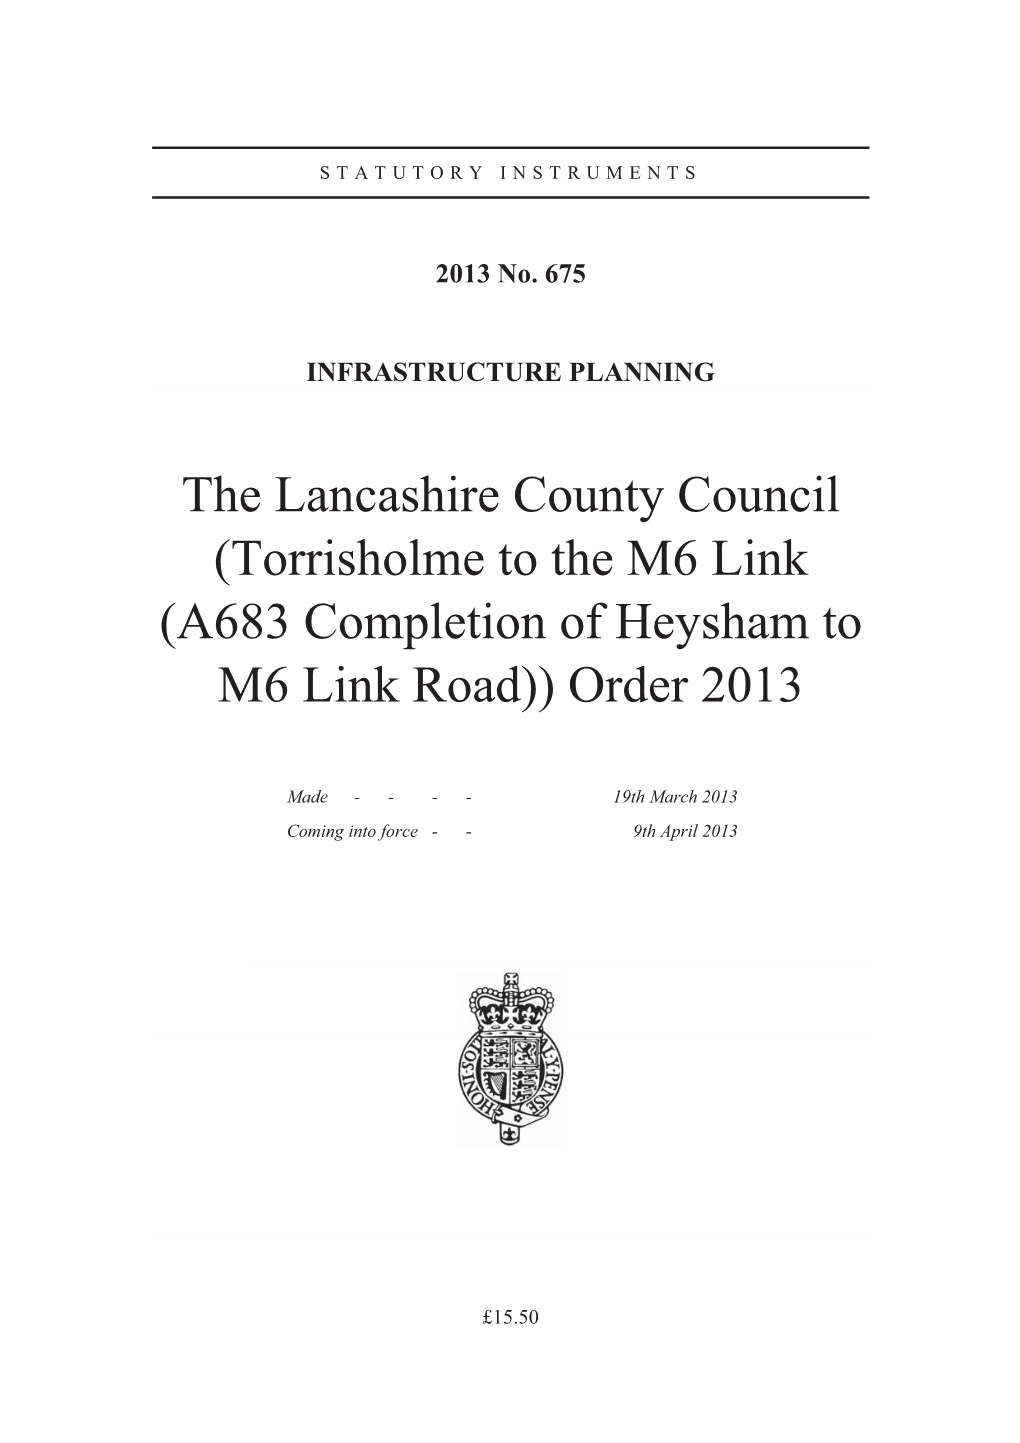 The Lancashire County Council (Torrisholme to the M6 Link (A683 Completion of Heysham to M6 Link Road)) Order 2013